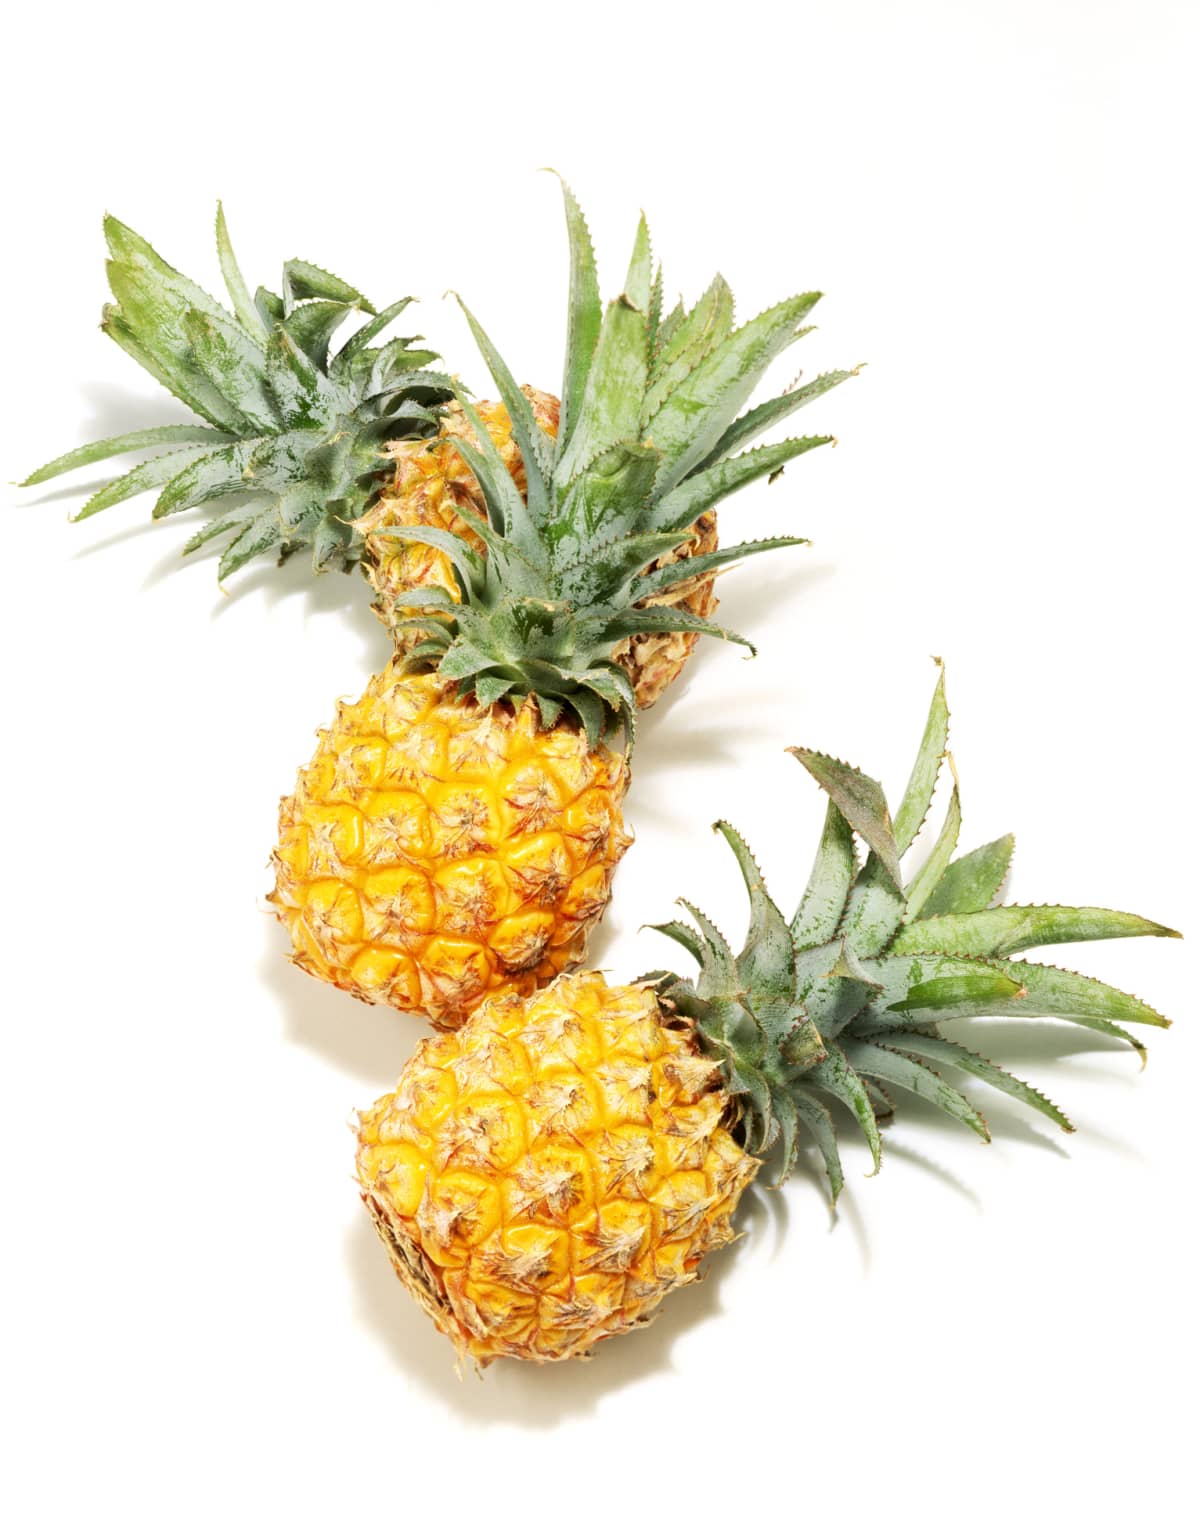 Three whole pineapples scattered on a white background